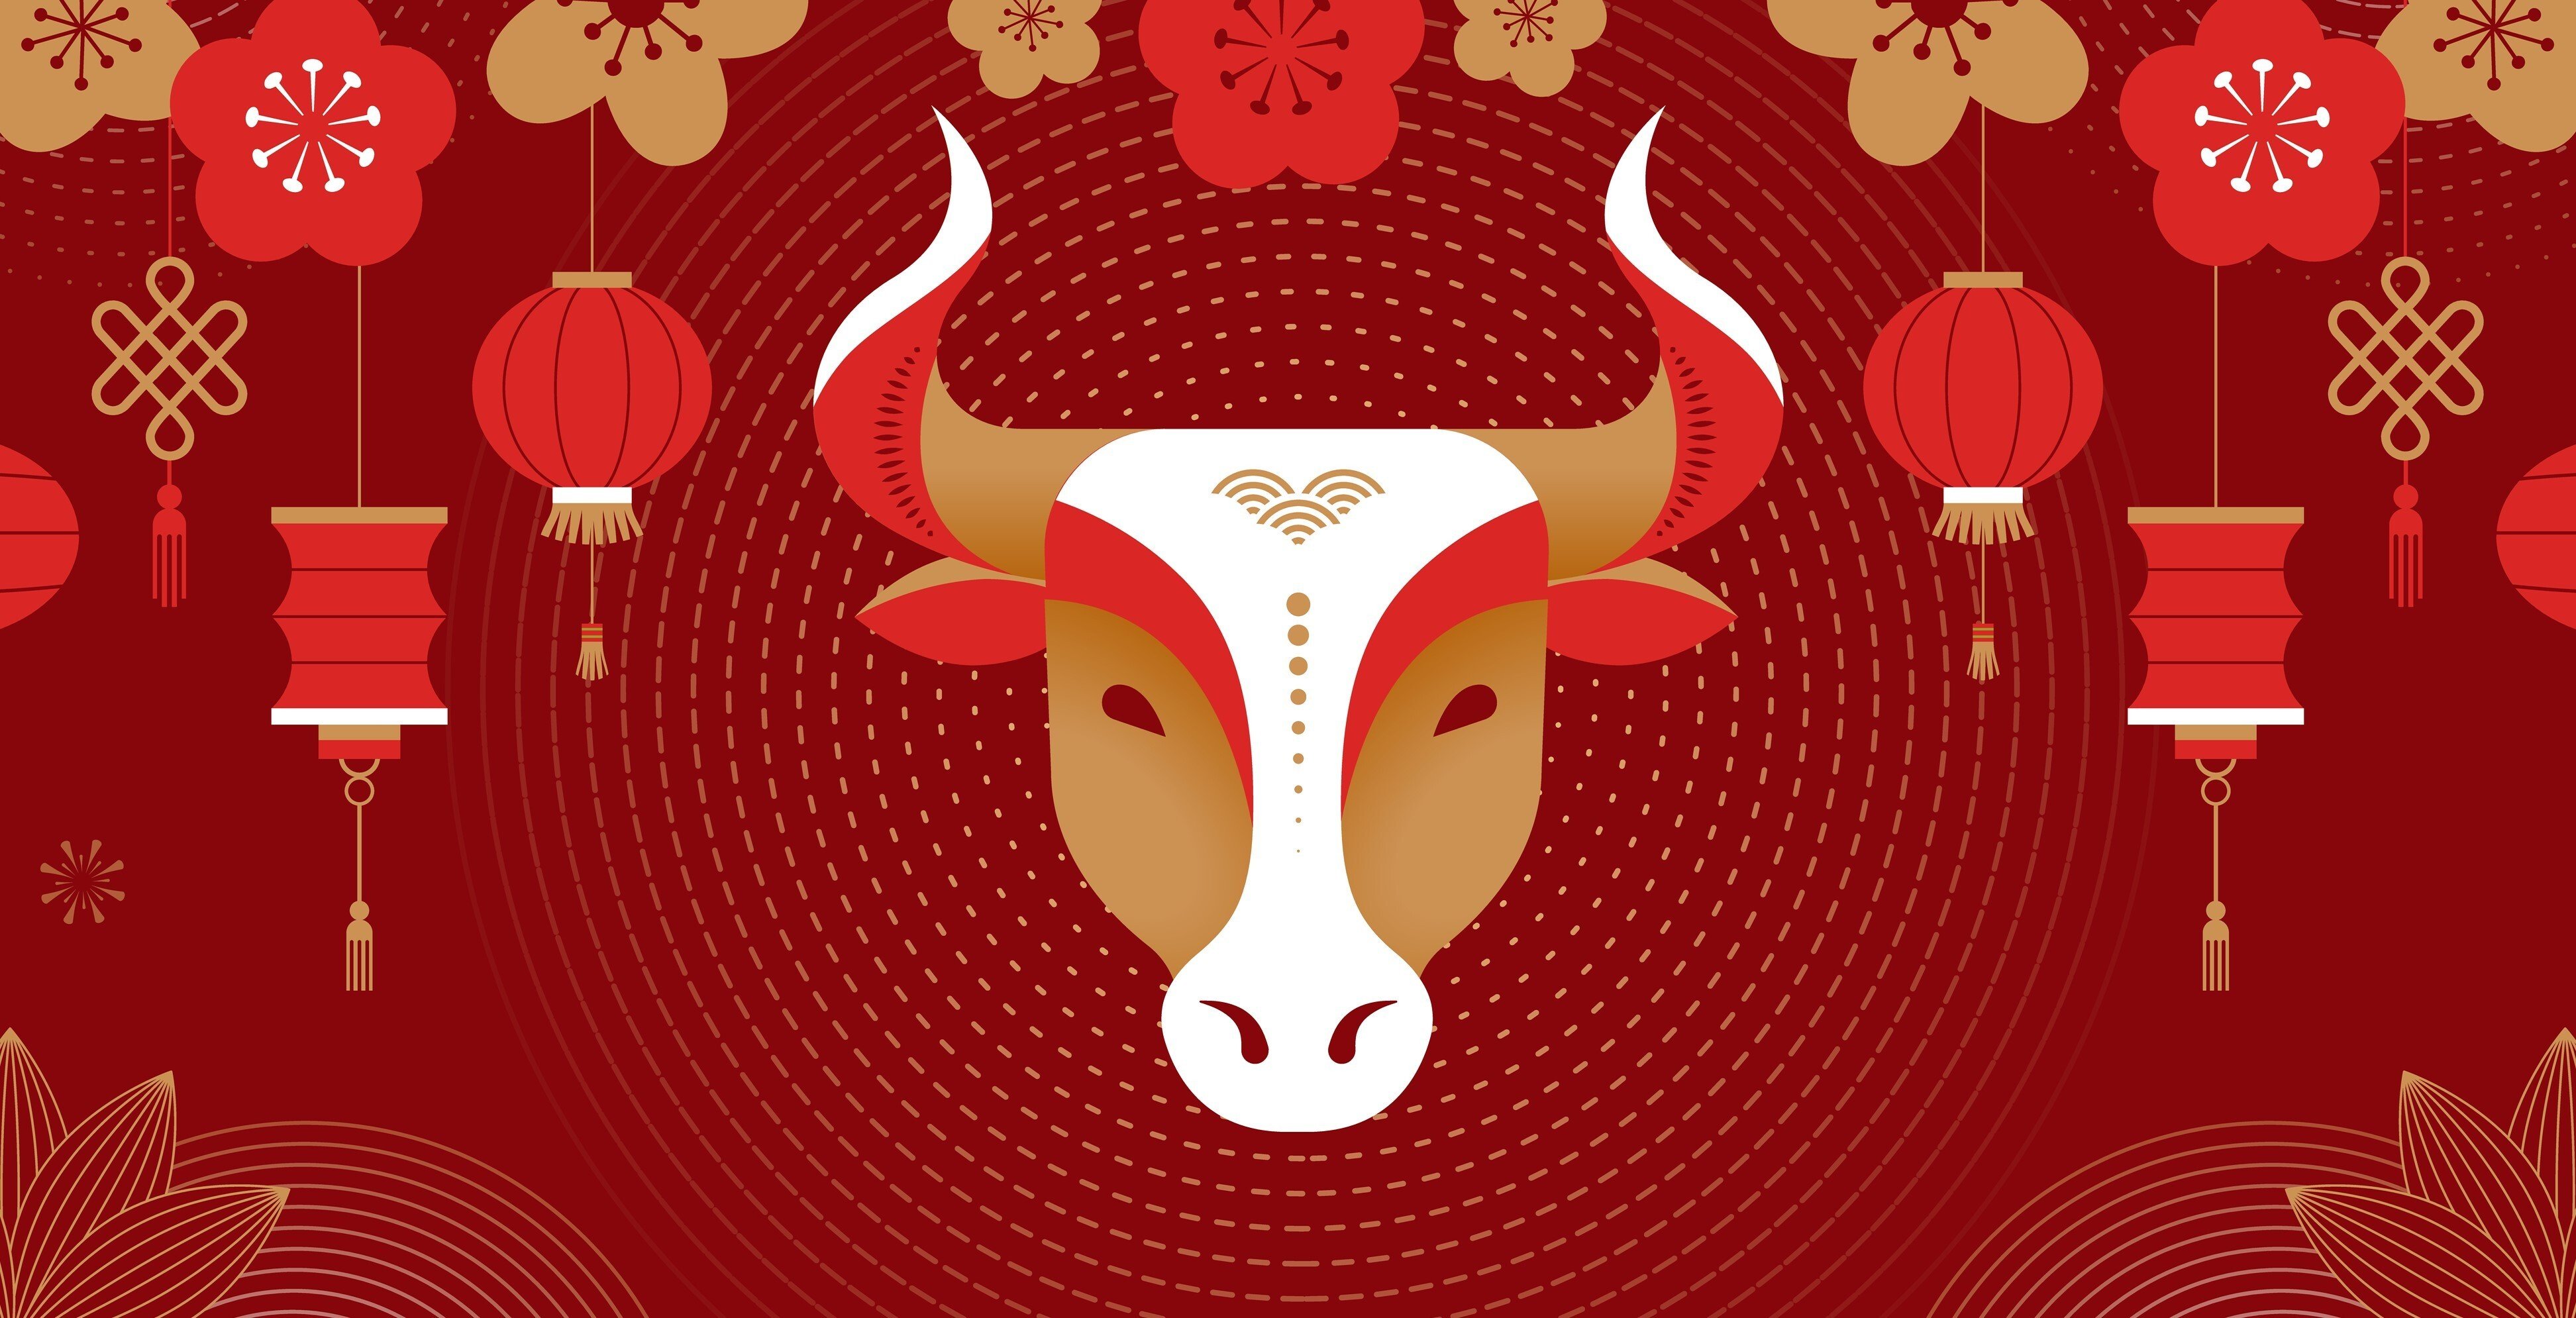 Don't have a cow! These awesome idioms will help you spice up your writing in the Year of the Ox.